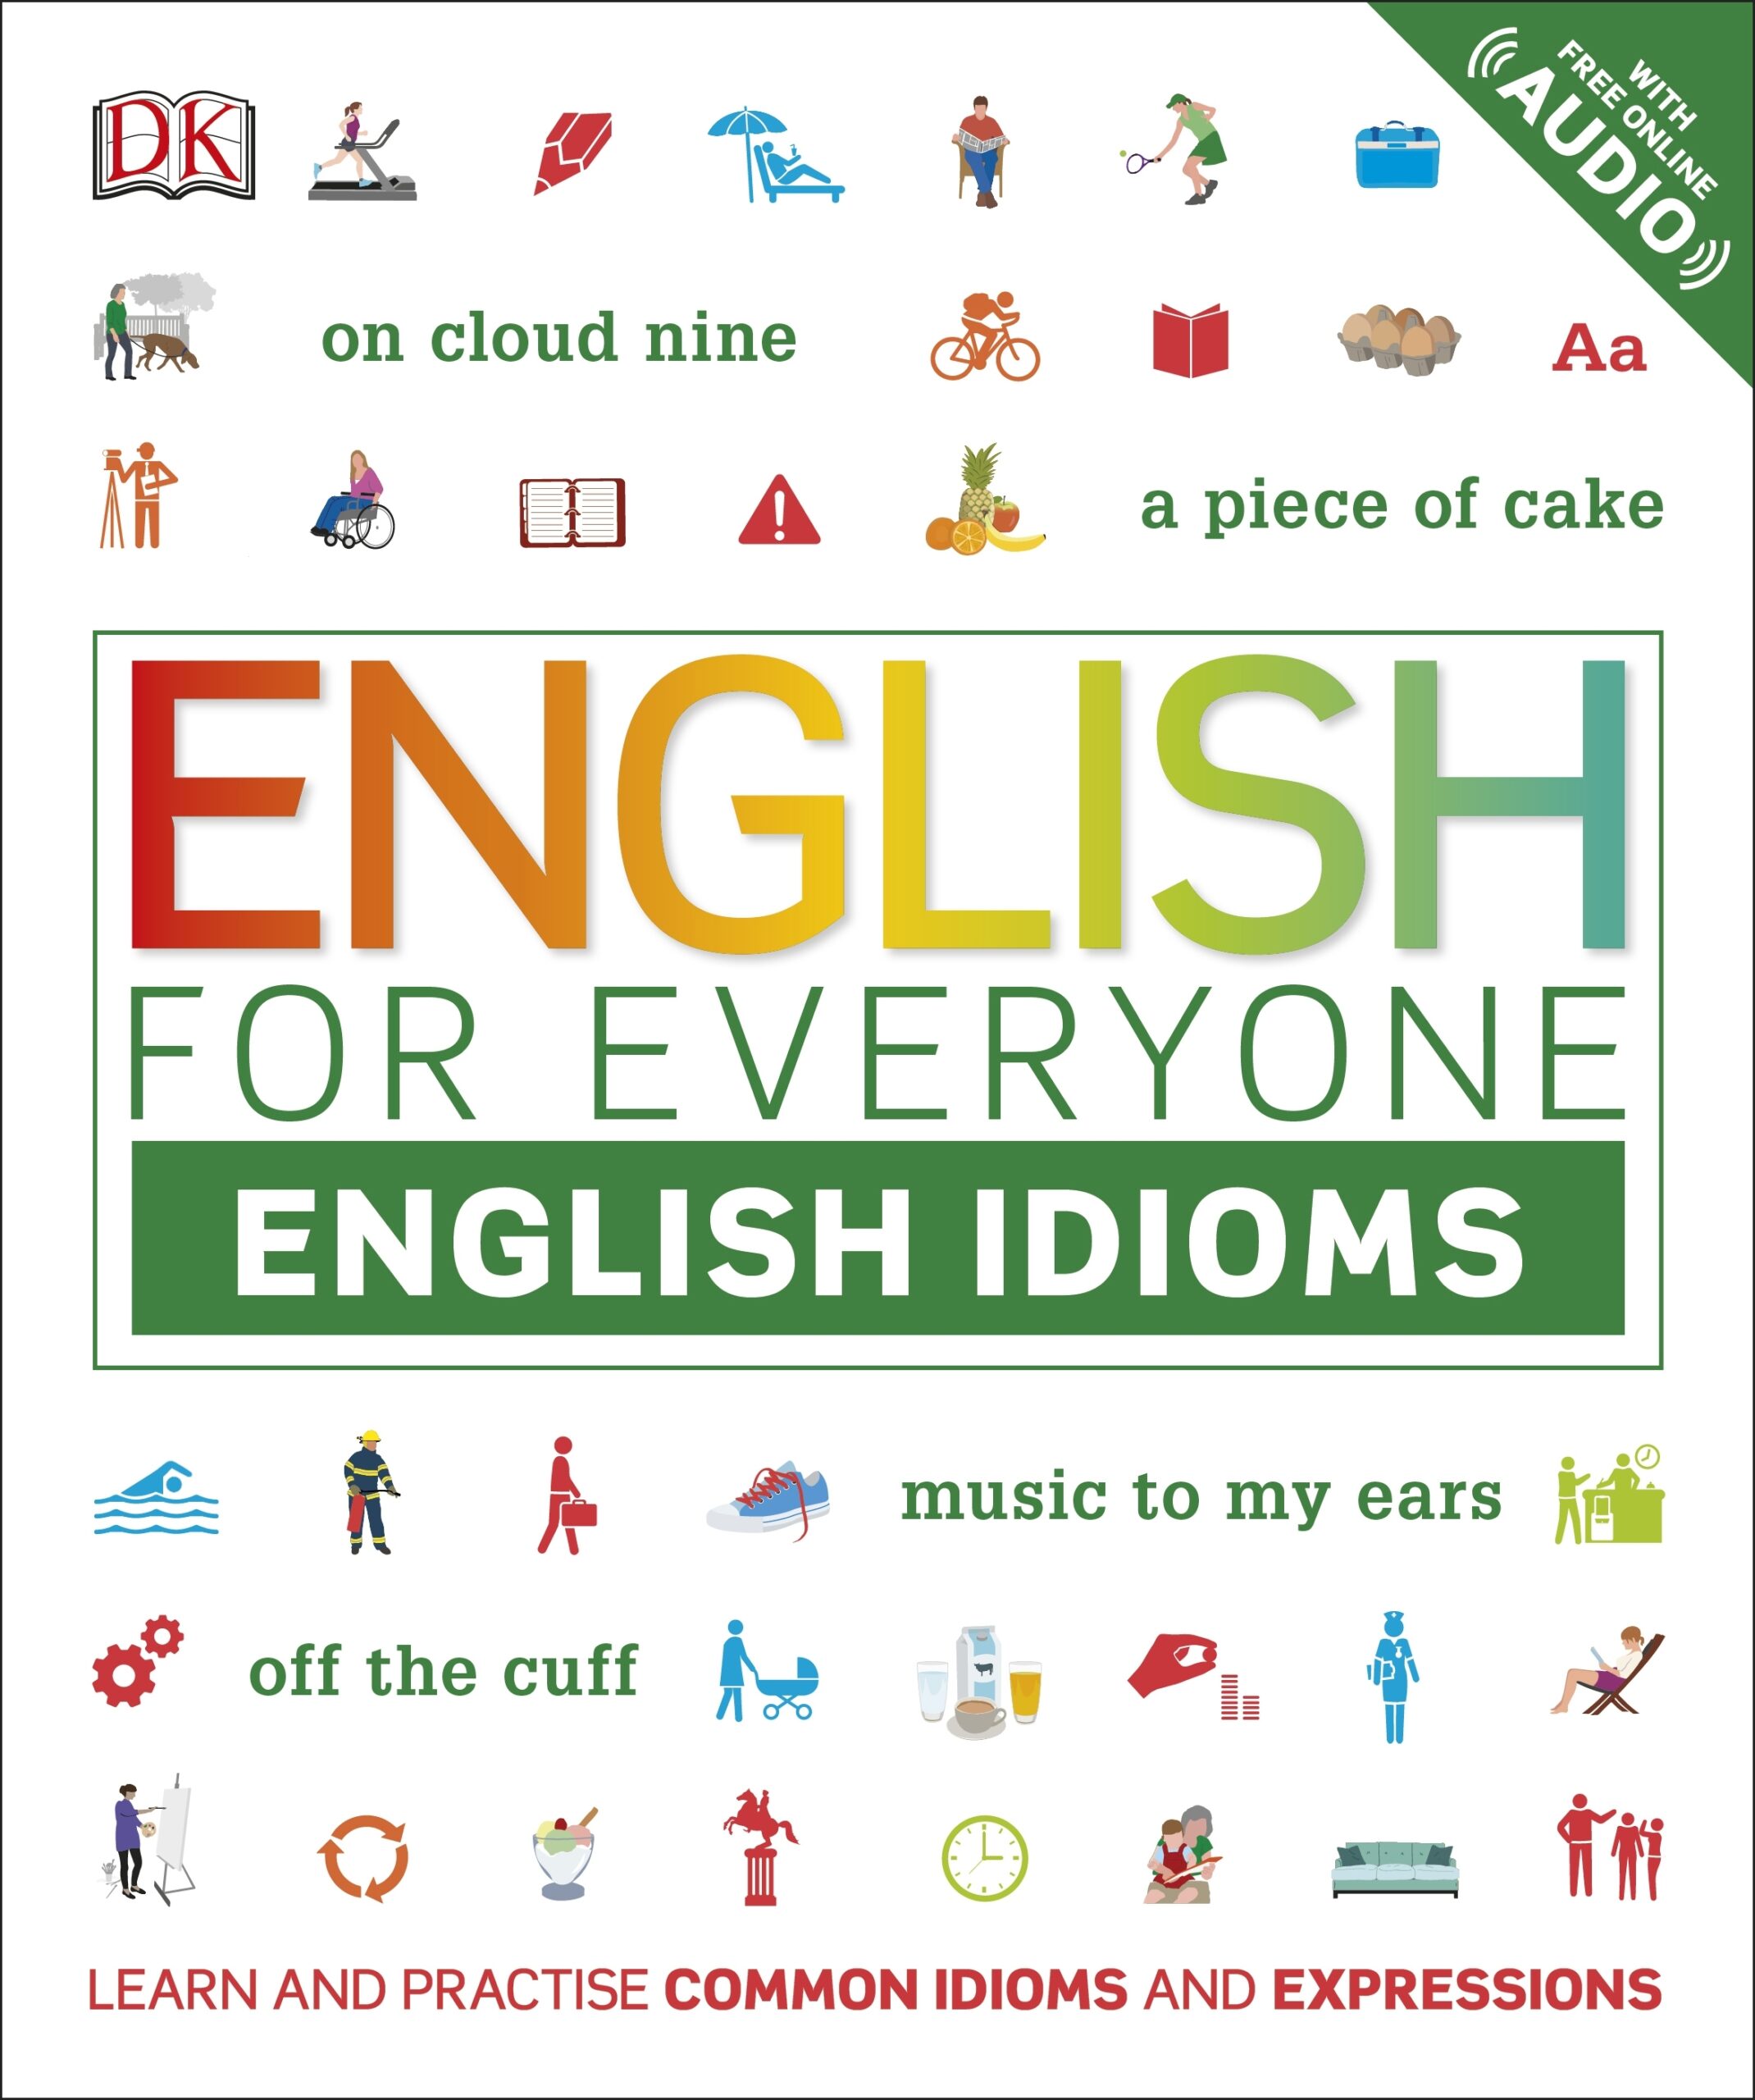 English for Everyone English Idioms scaled